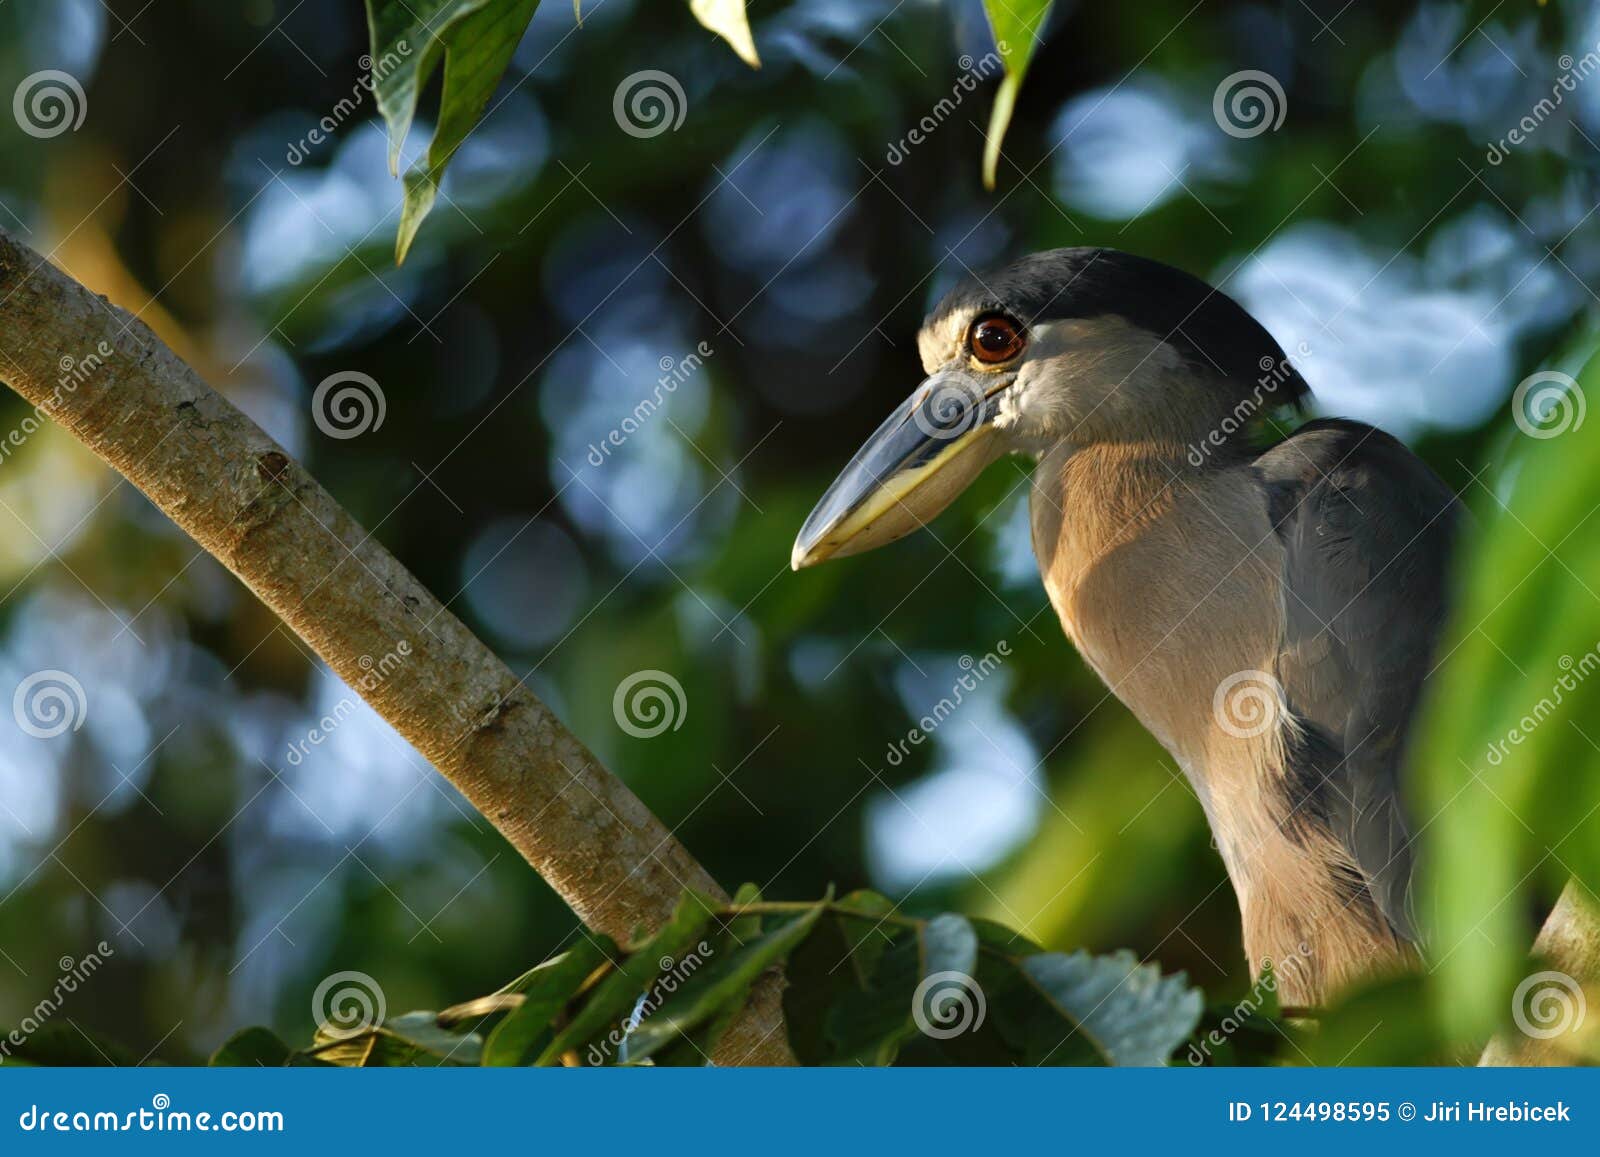 boat-billed heron - cochlearius cochlearius sitting on branch in its natural enviroment next to river, green leaves in background